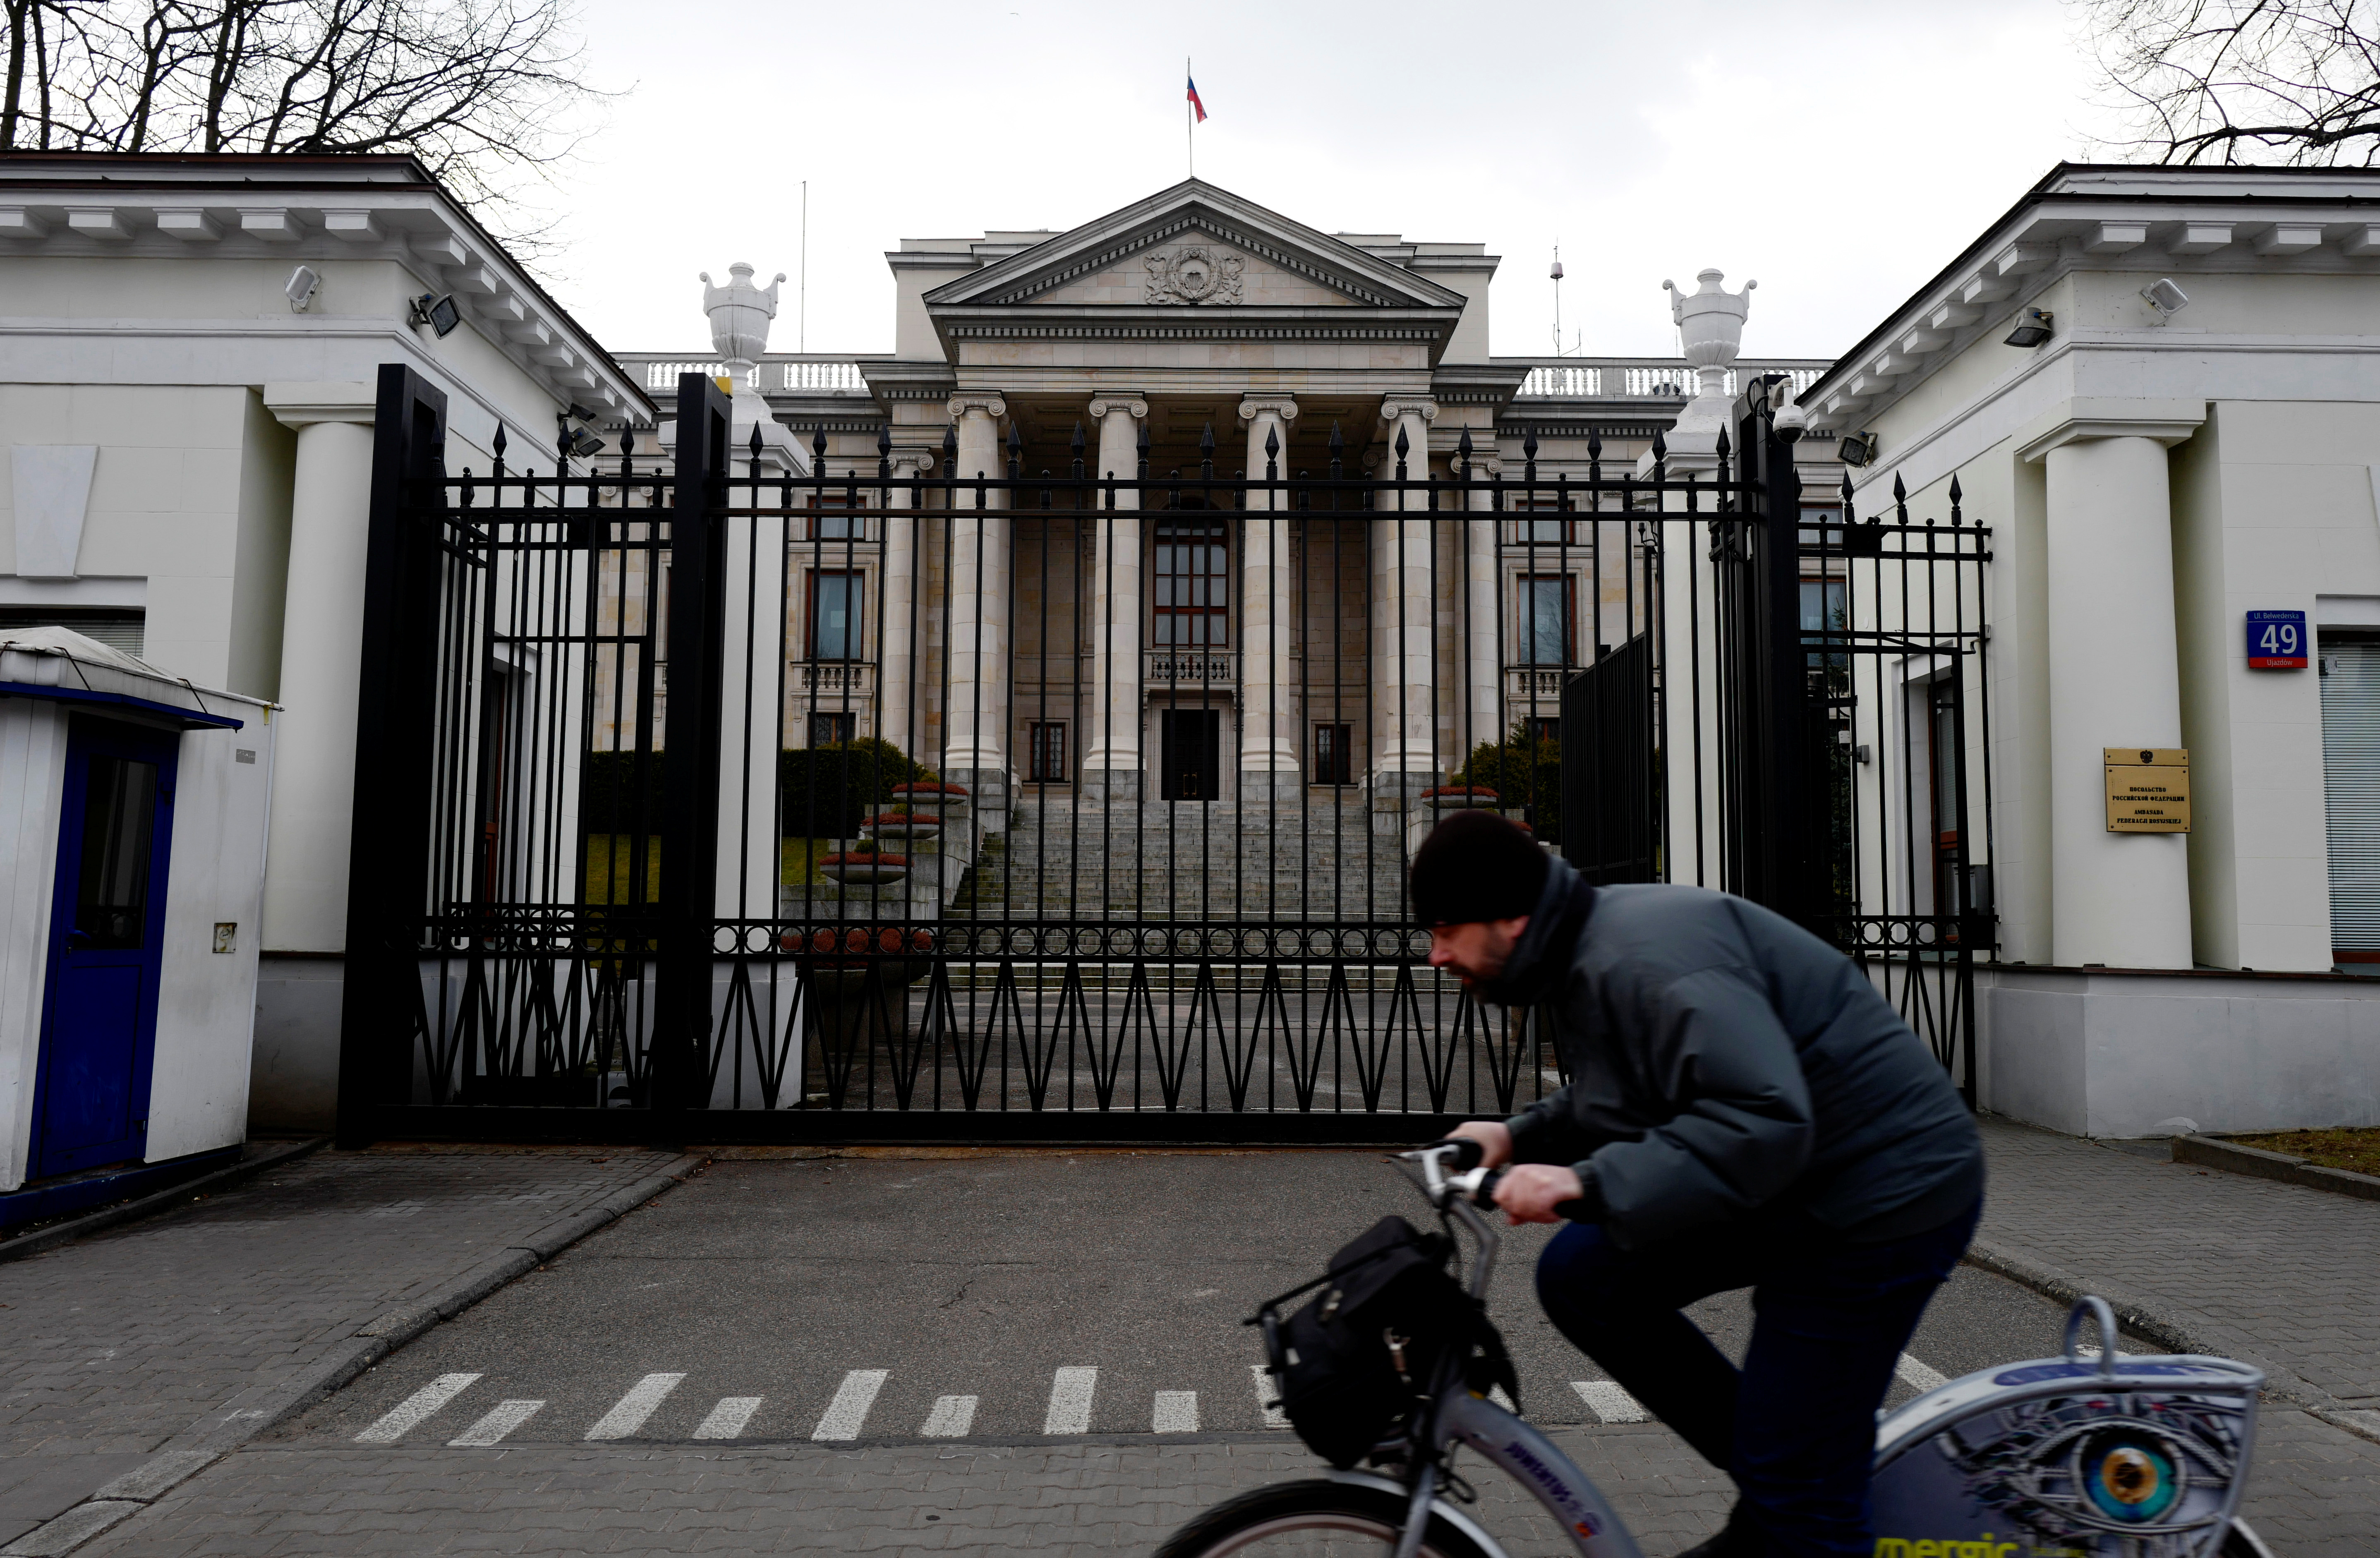 Man rides a bicycle in front of the Russian embassy building in Warsaw